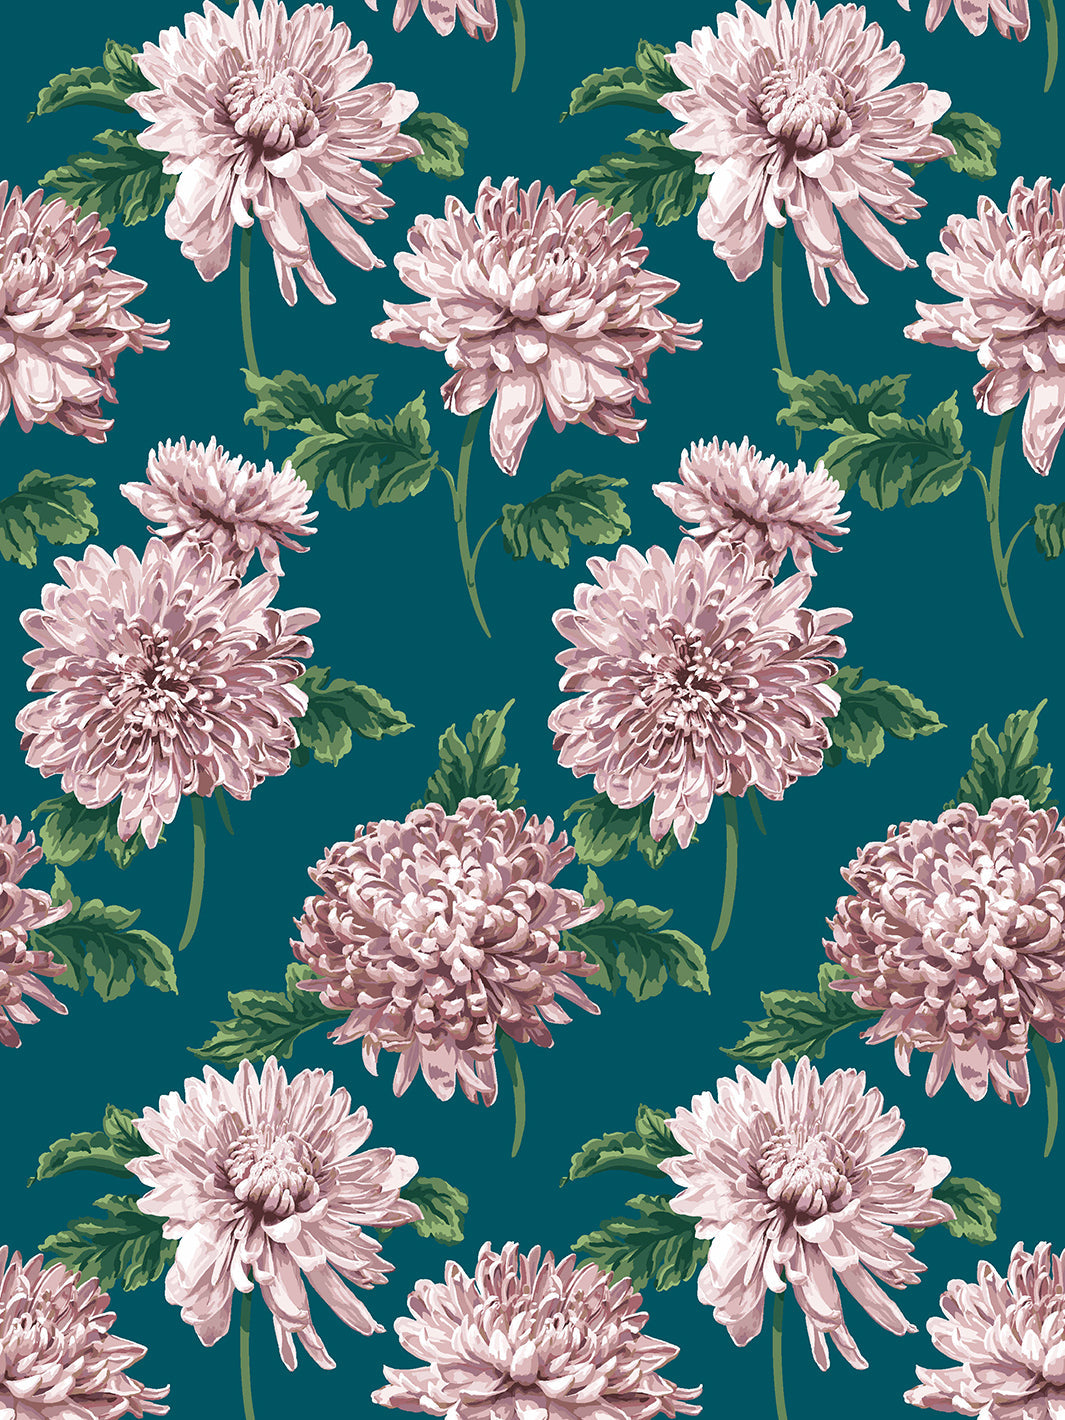 'Mums for Marion Small' Wallpaper by Sarah Jessica Parker - Peacock